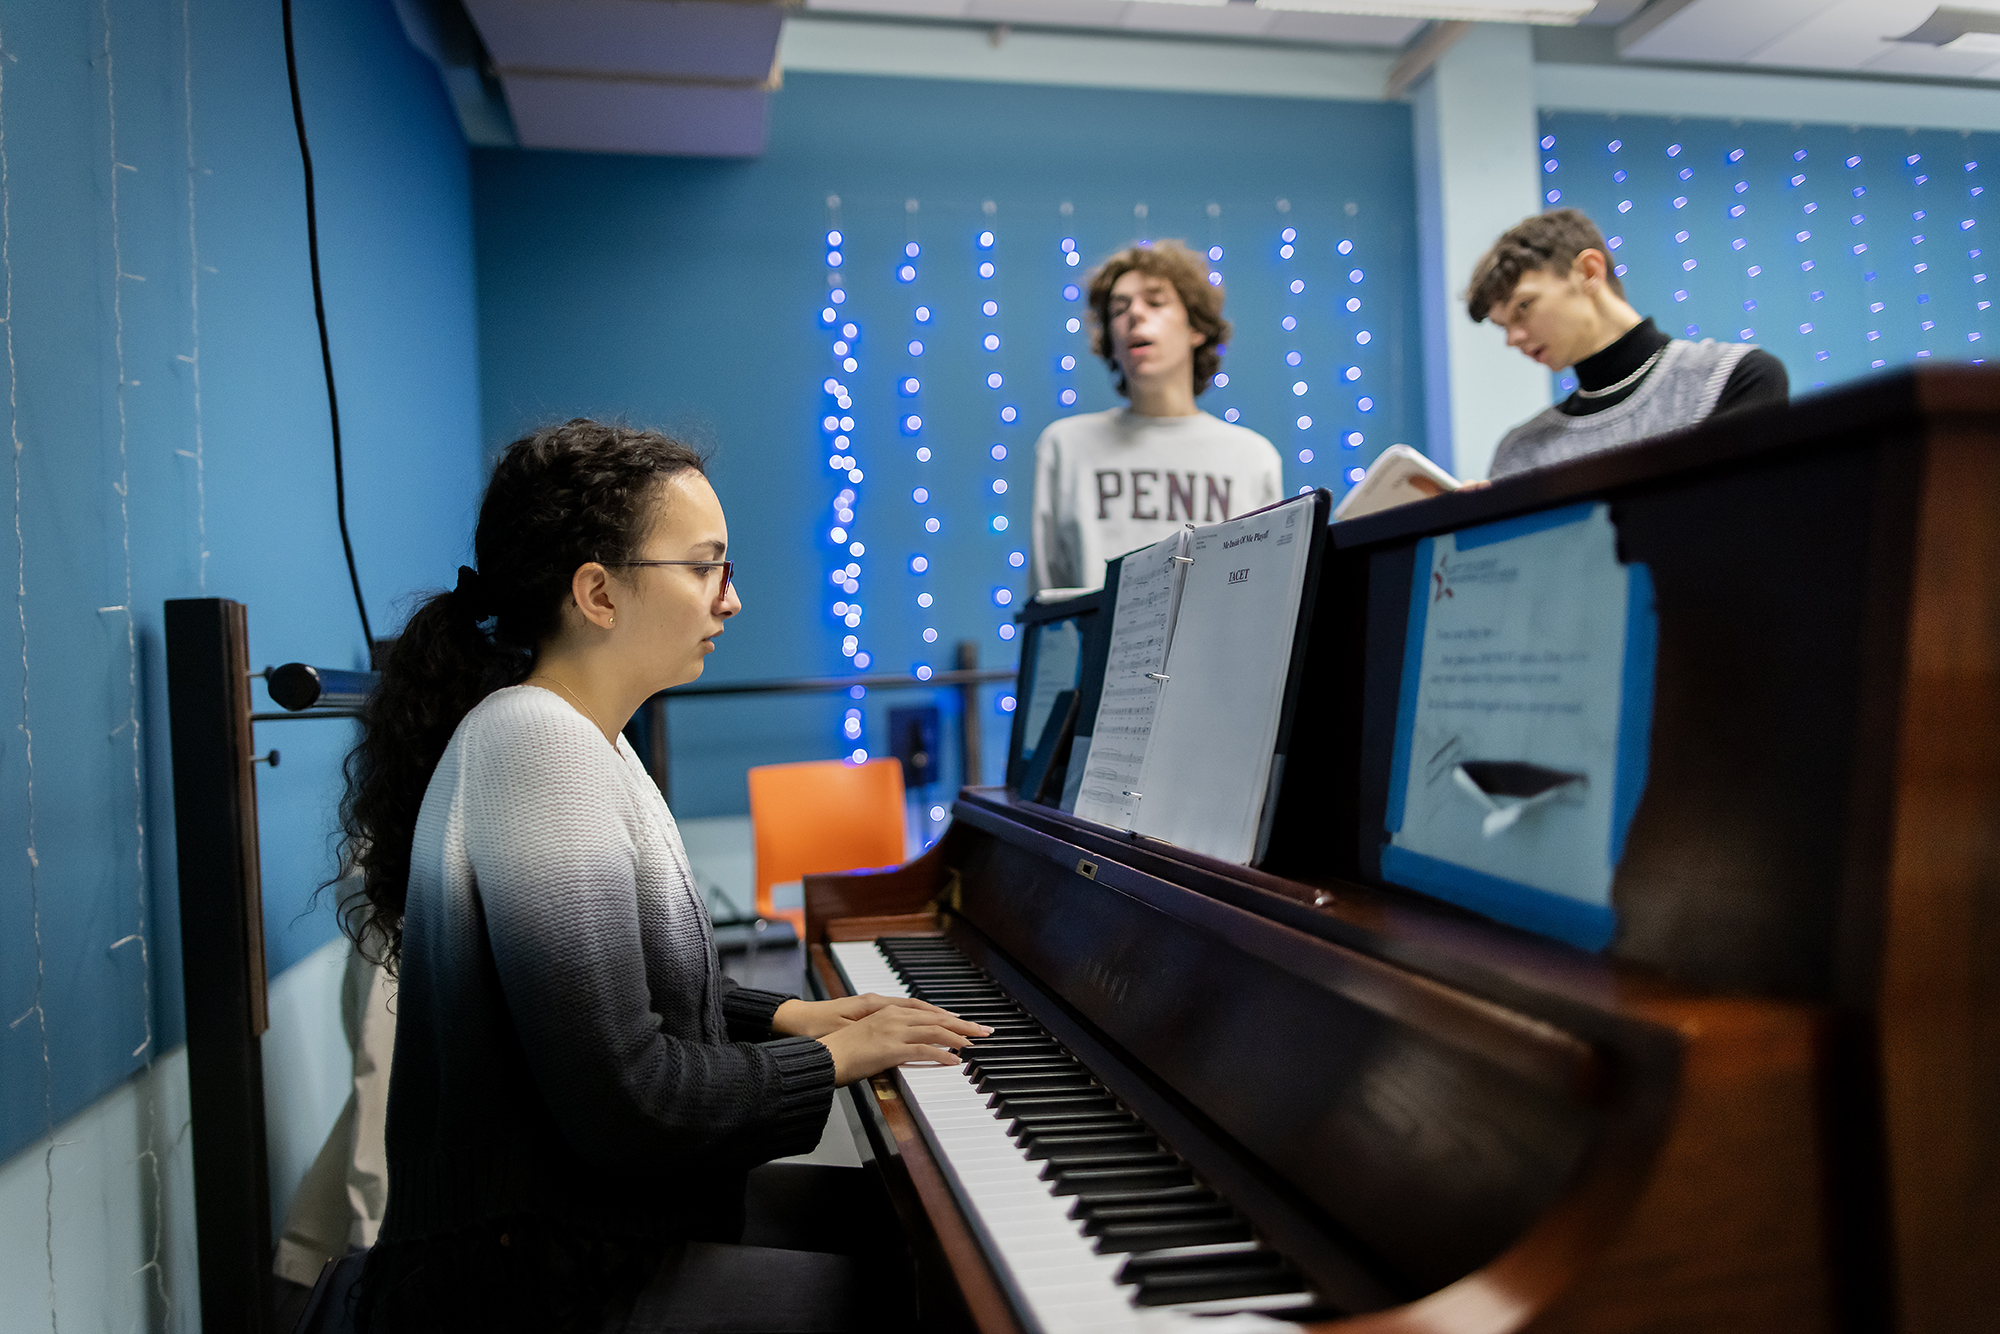 Members of a Penn musical group rehearsing to piano.